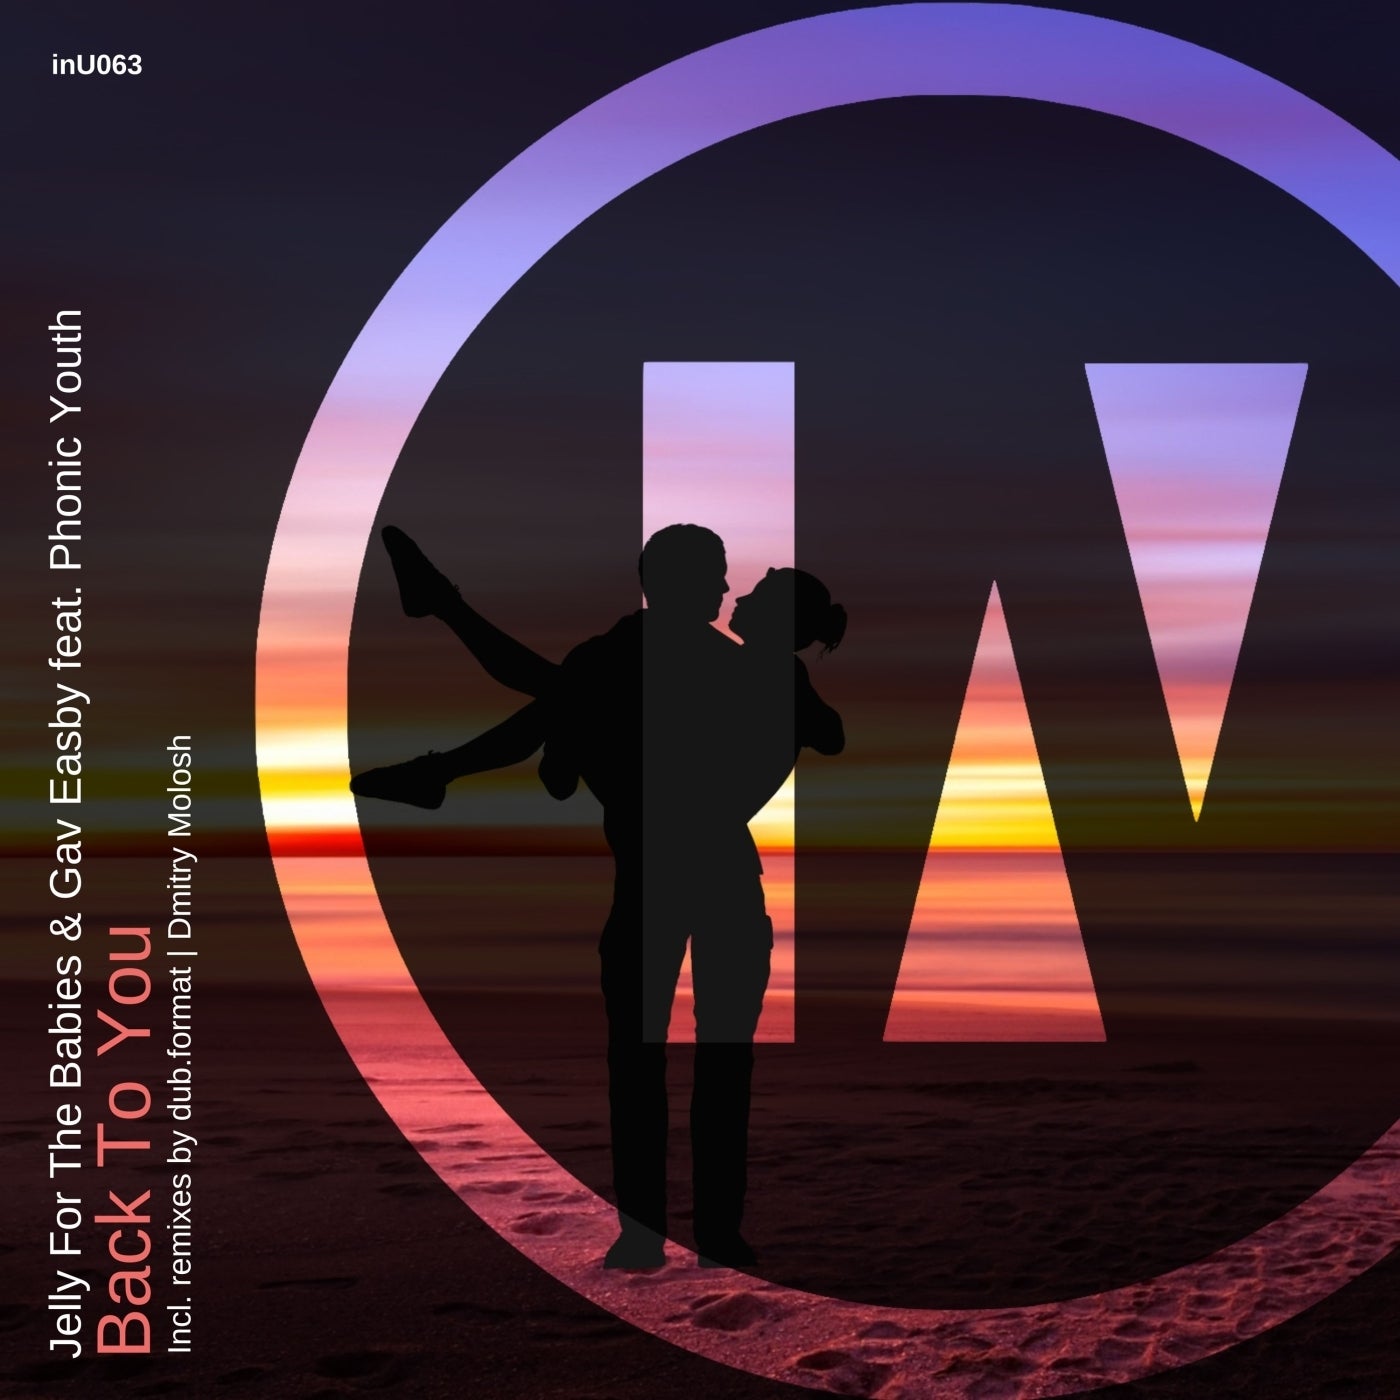 image cover: Jelly For The Babies, Phonic Youth, Gav Easby - Back to You on inU